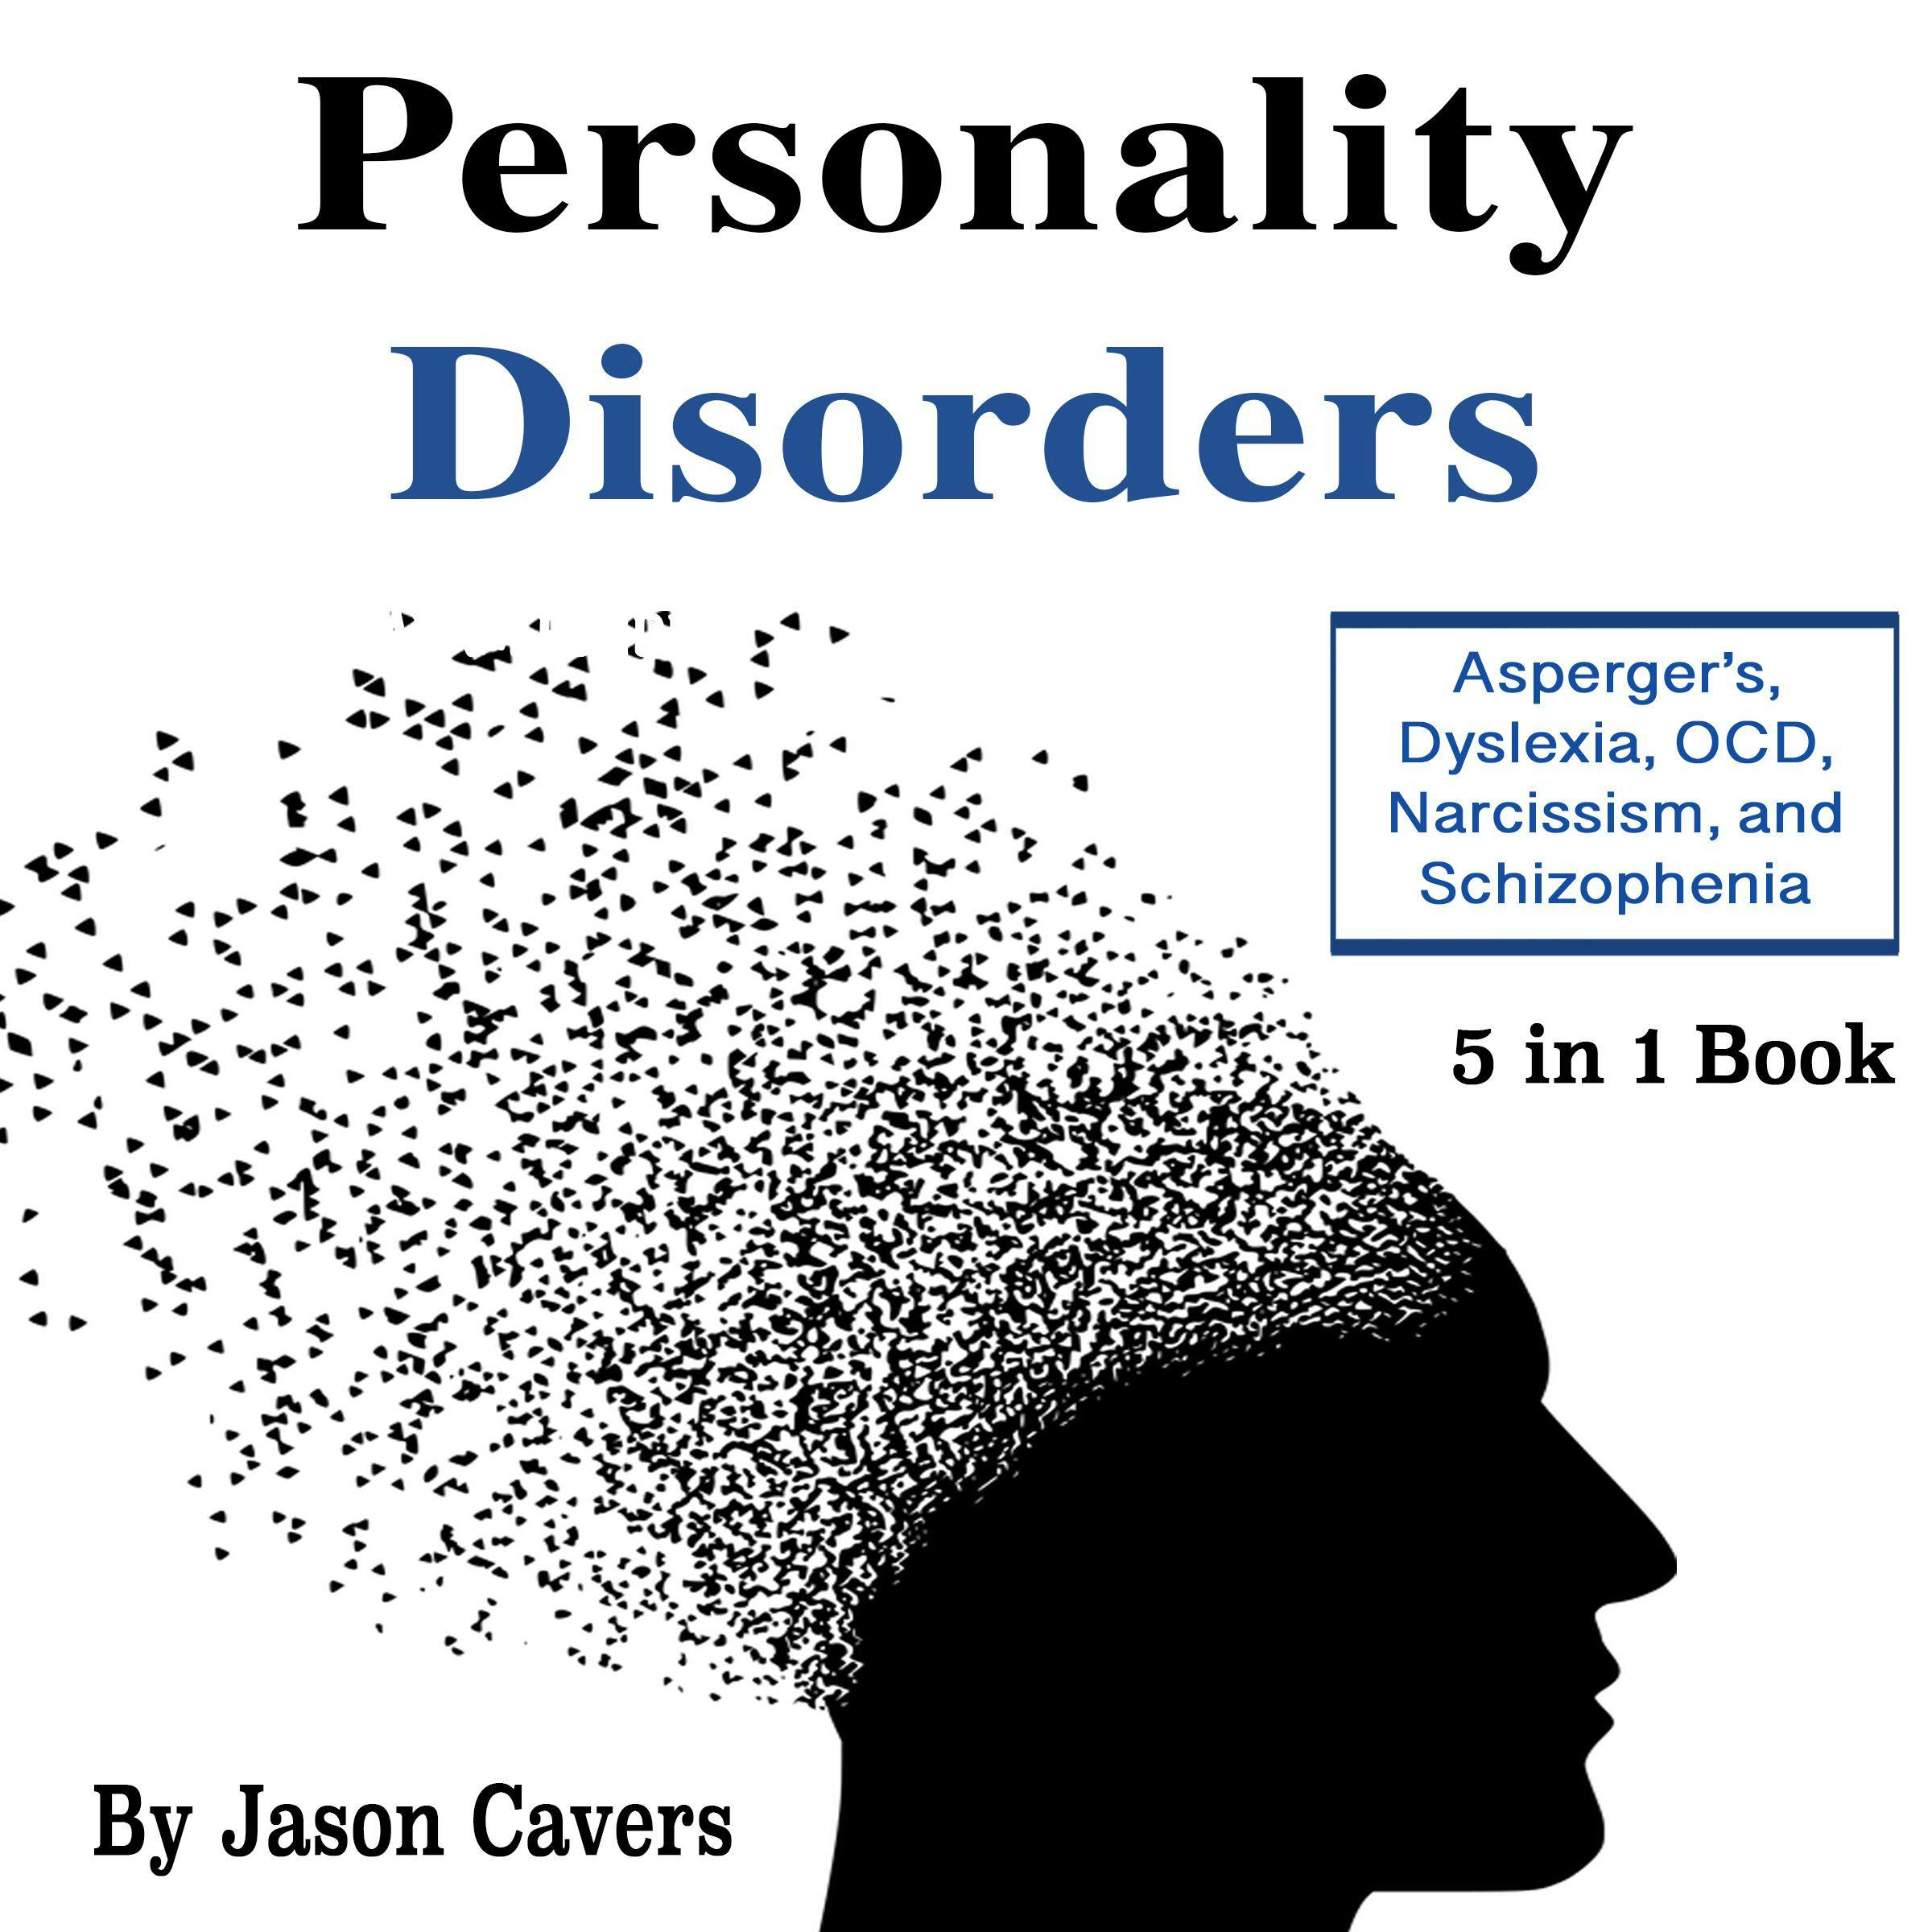 Personality Disorders: Asperger’s, Dyslexia, OCD, Narcissism, and Schizophrenia - Shelbey Peterson, Albert Rogers, Adrian Tweeley